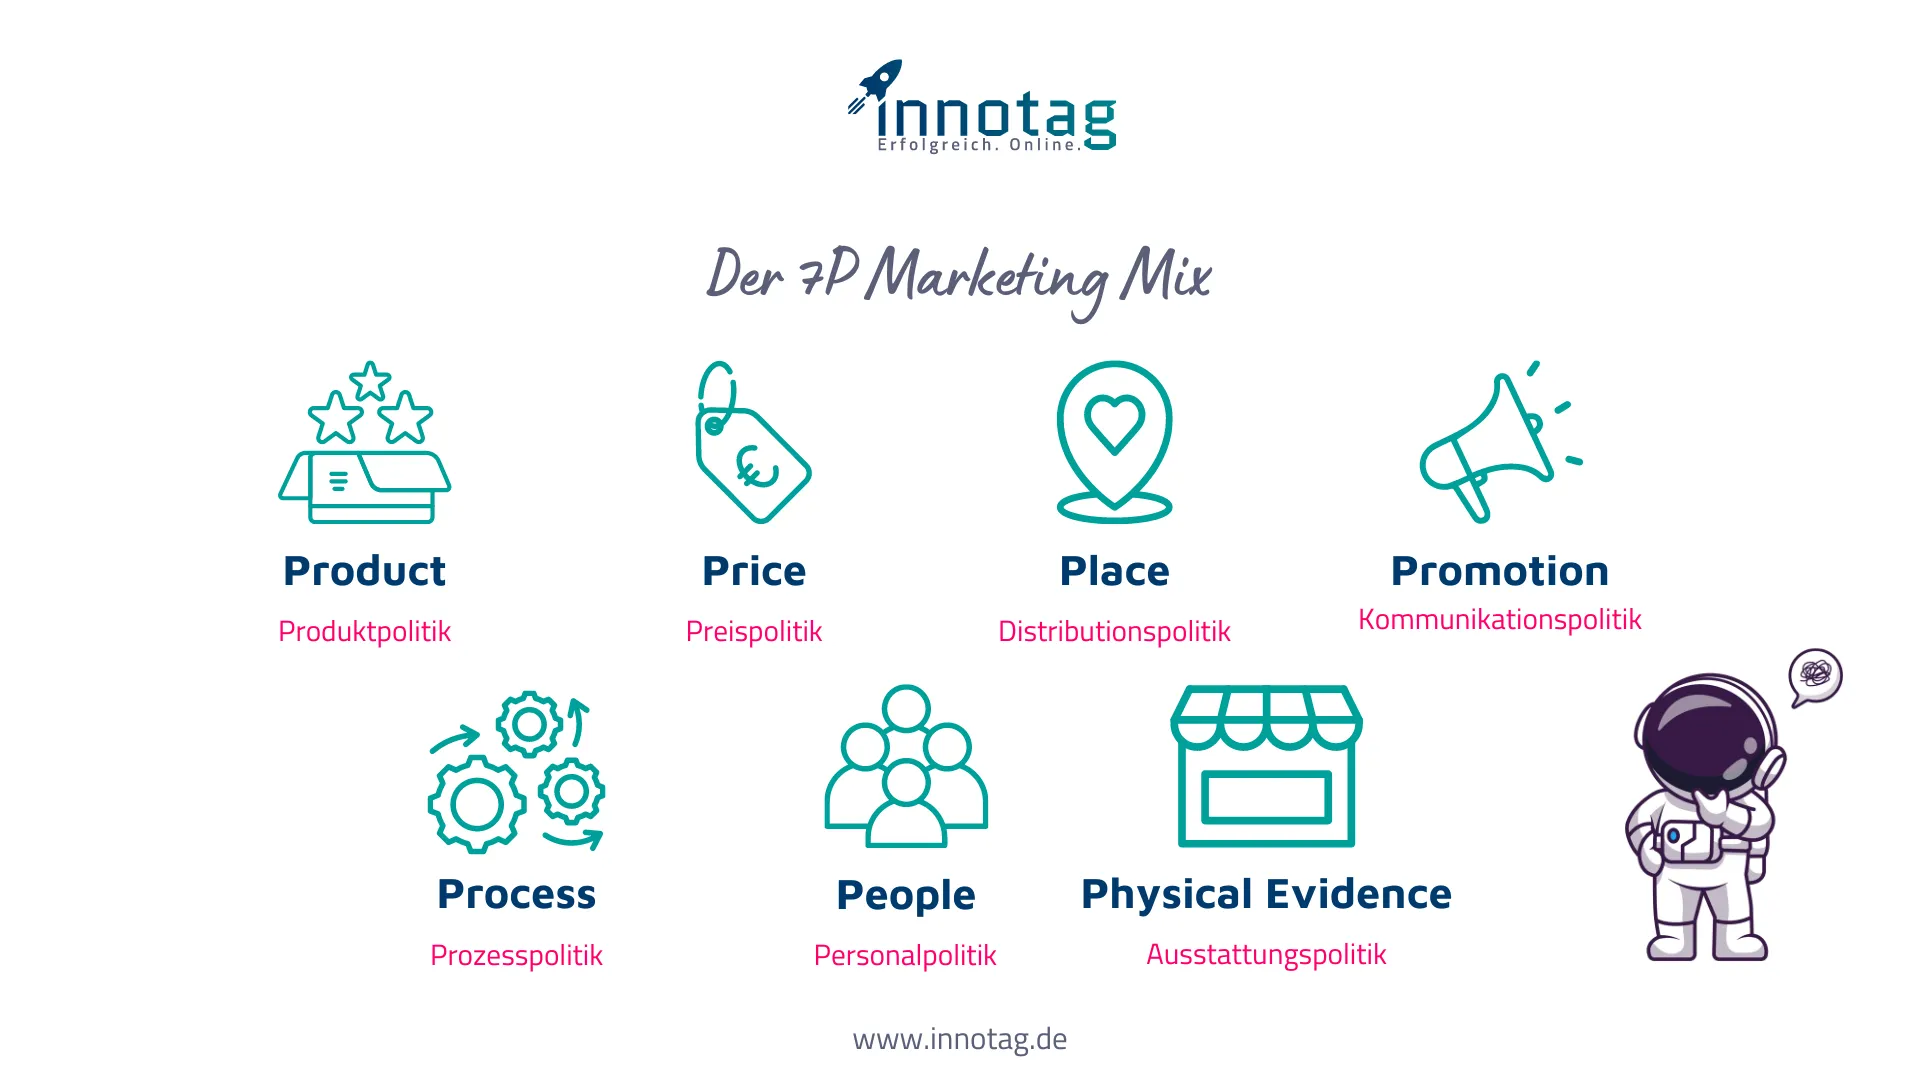 Marketing Mix 7P: Product, Price, Place, Promotion, People, Process, Physical Evidence